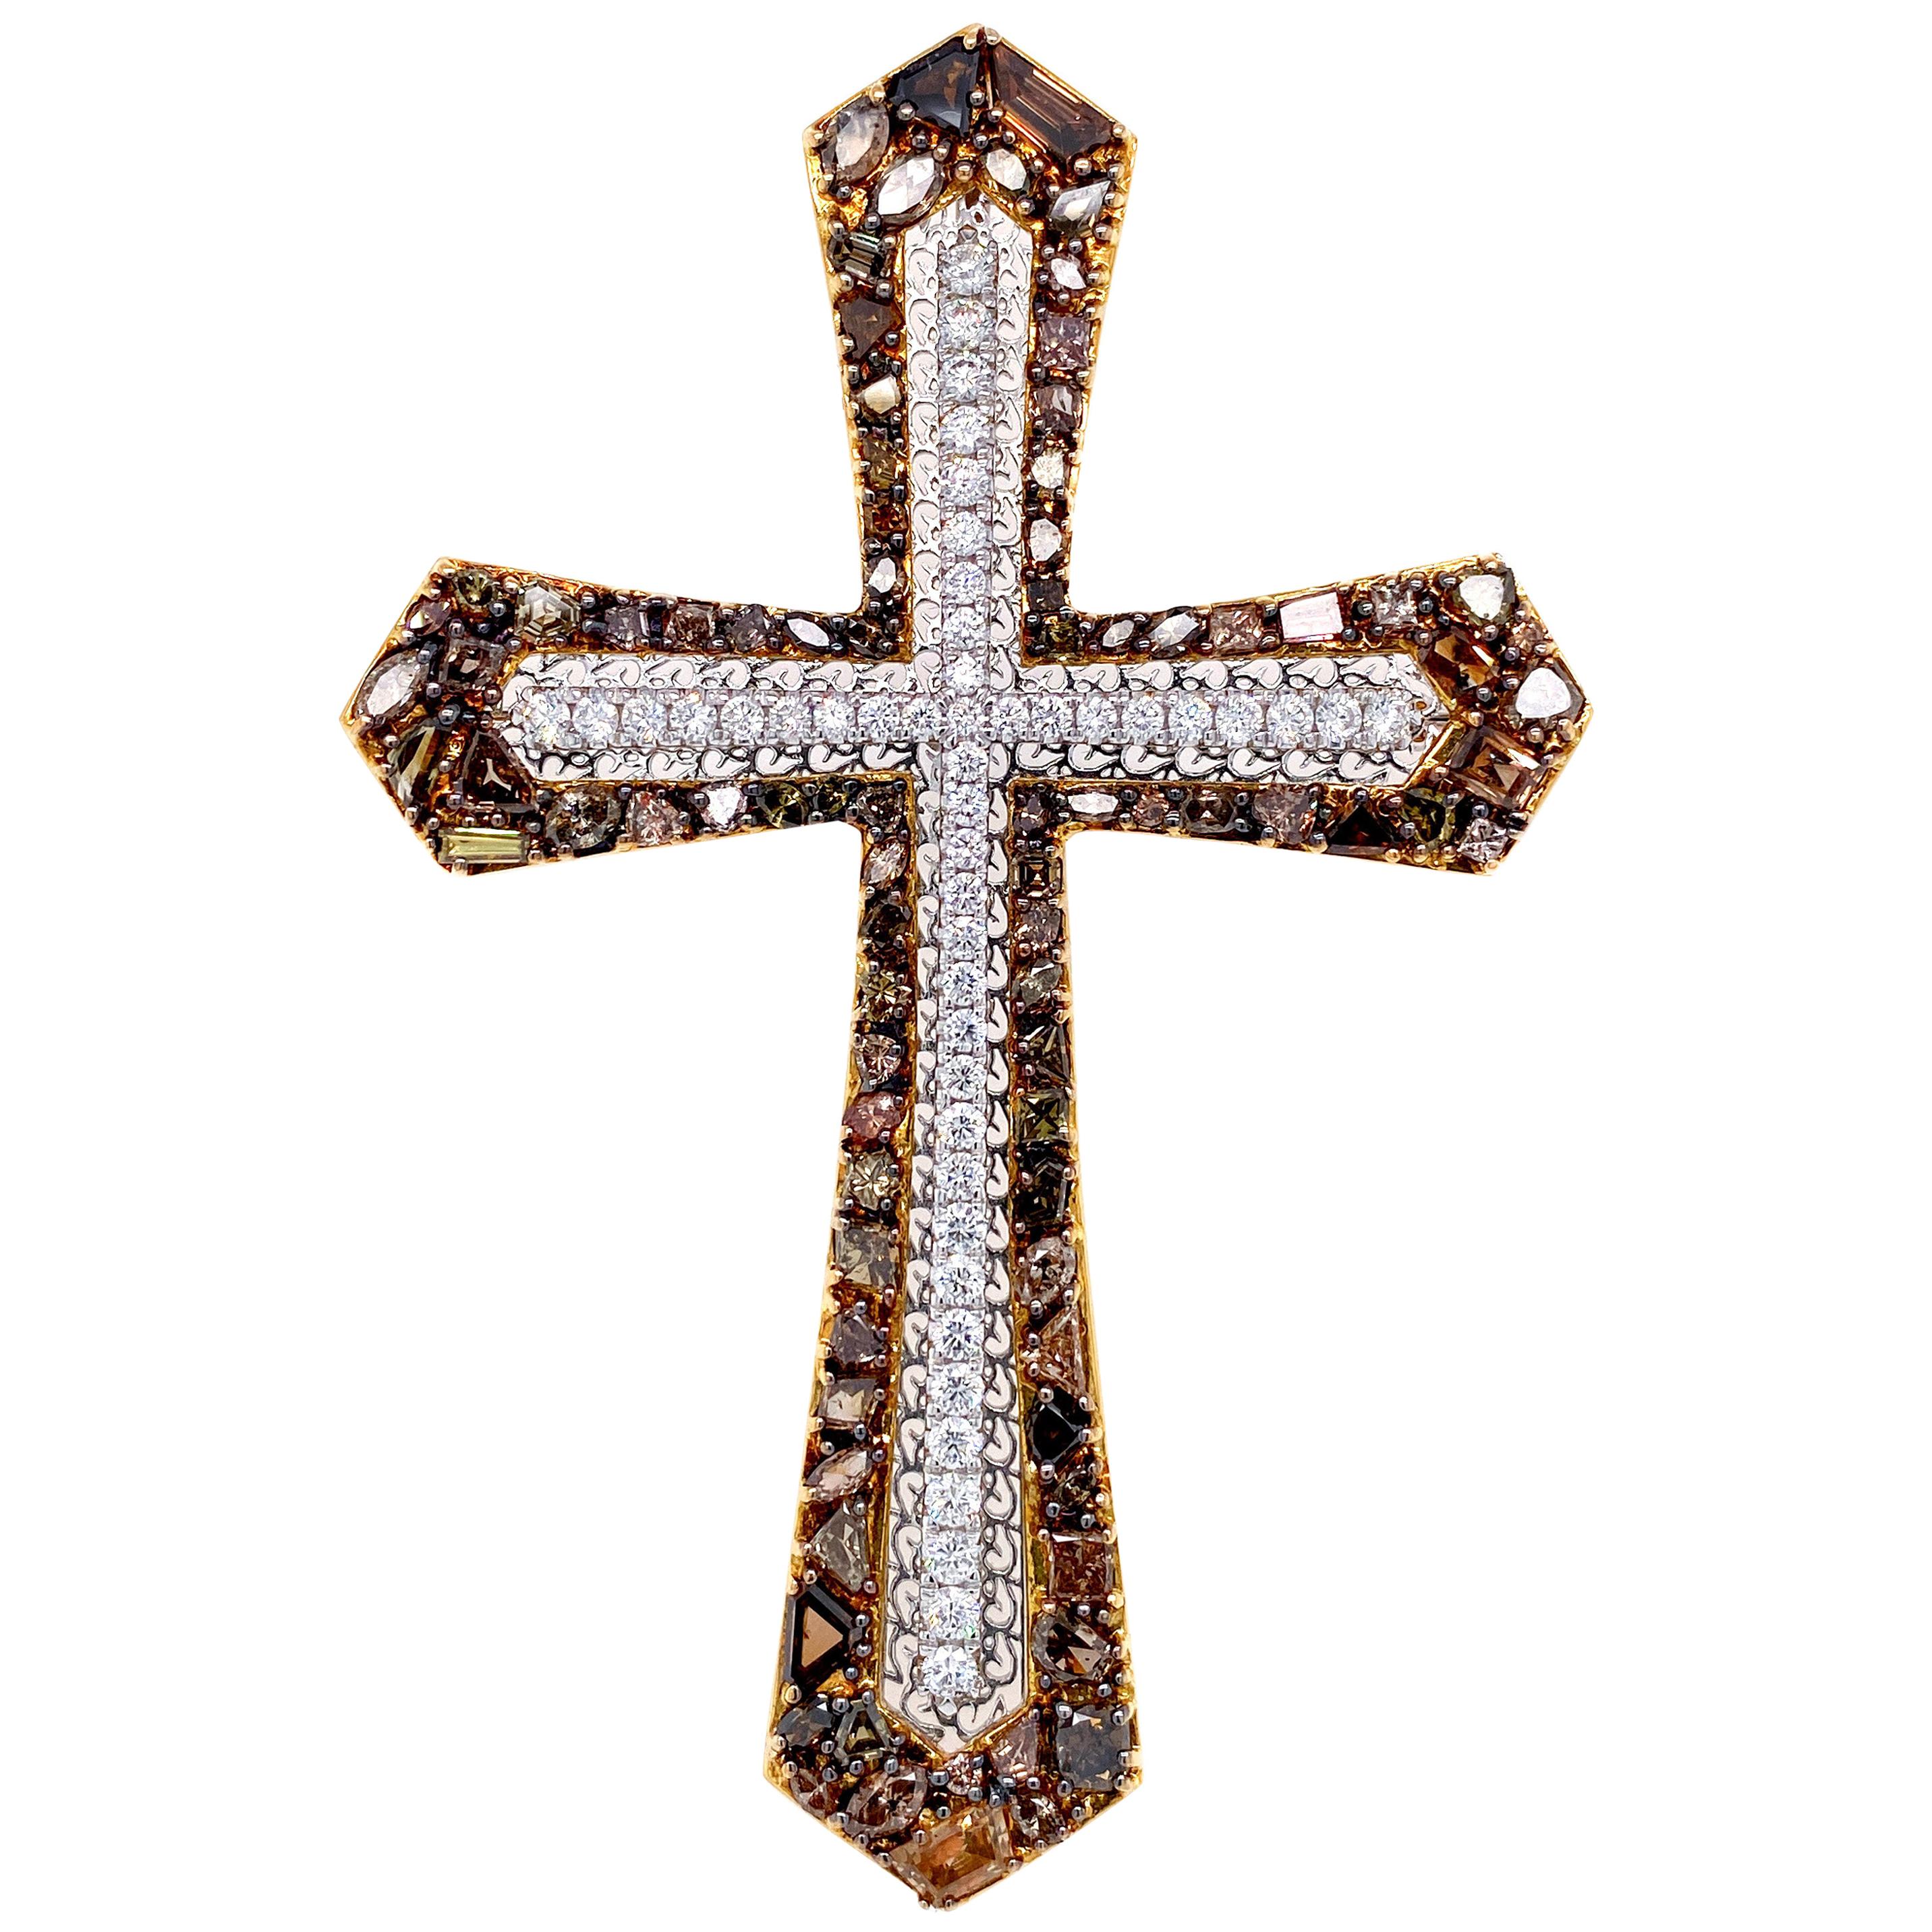 Transformable Fancy Color Diamond Cross Brooch and Pendant by Dilys’ in 18K Gold